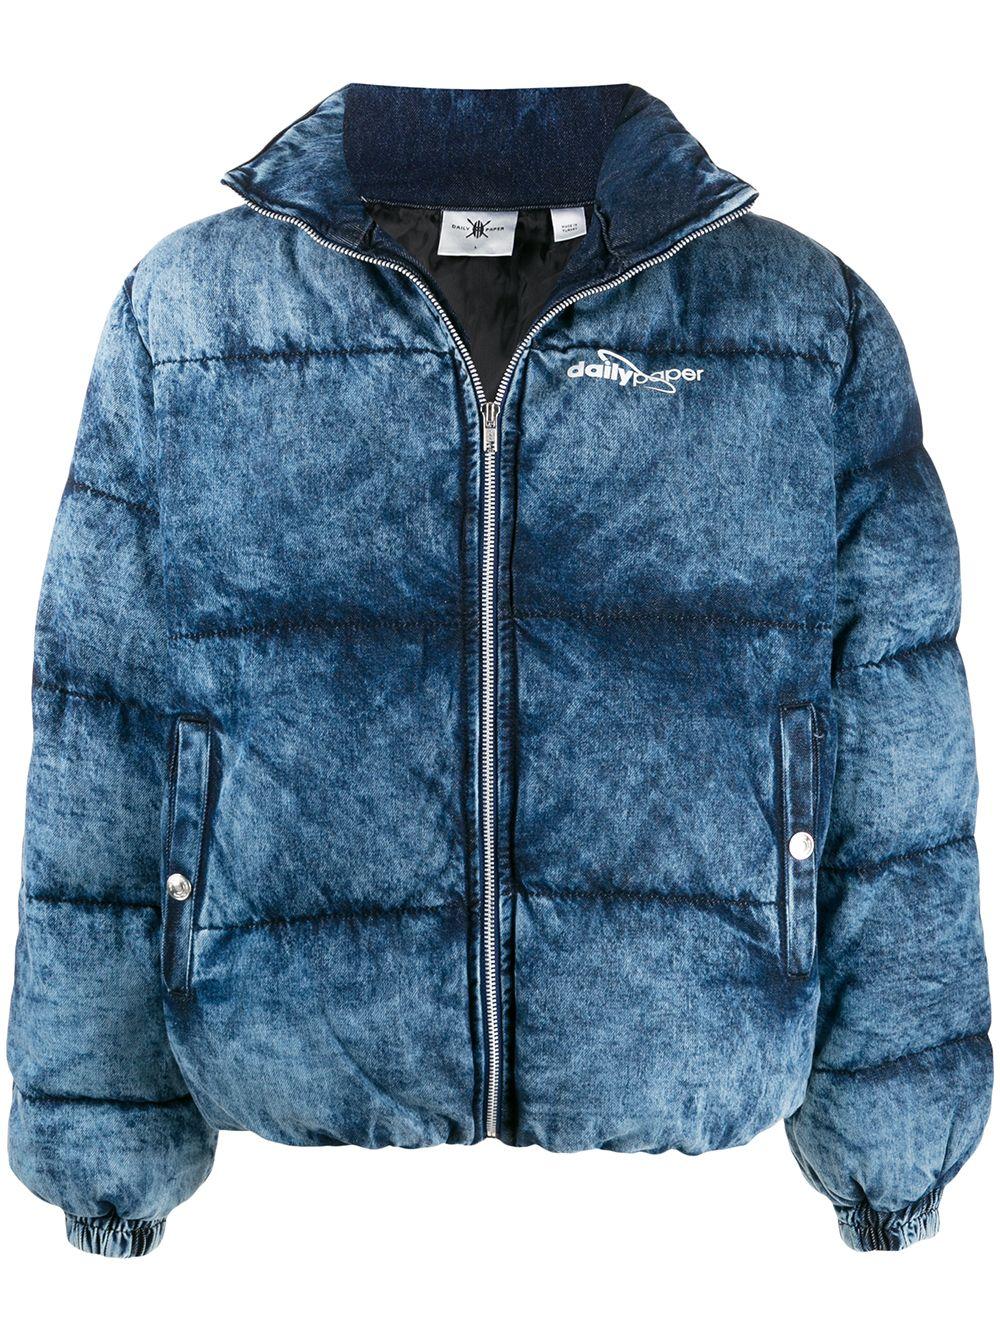 Daily Paper Padded Acid Washed Jacket in Blue for Men | Lyst Australia